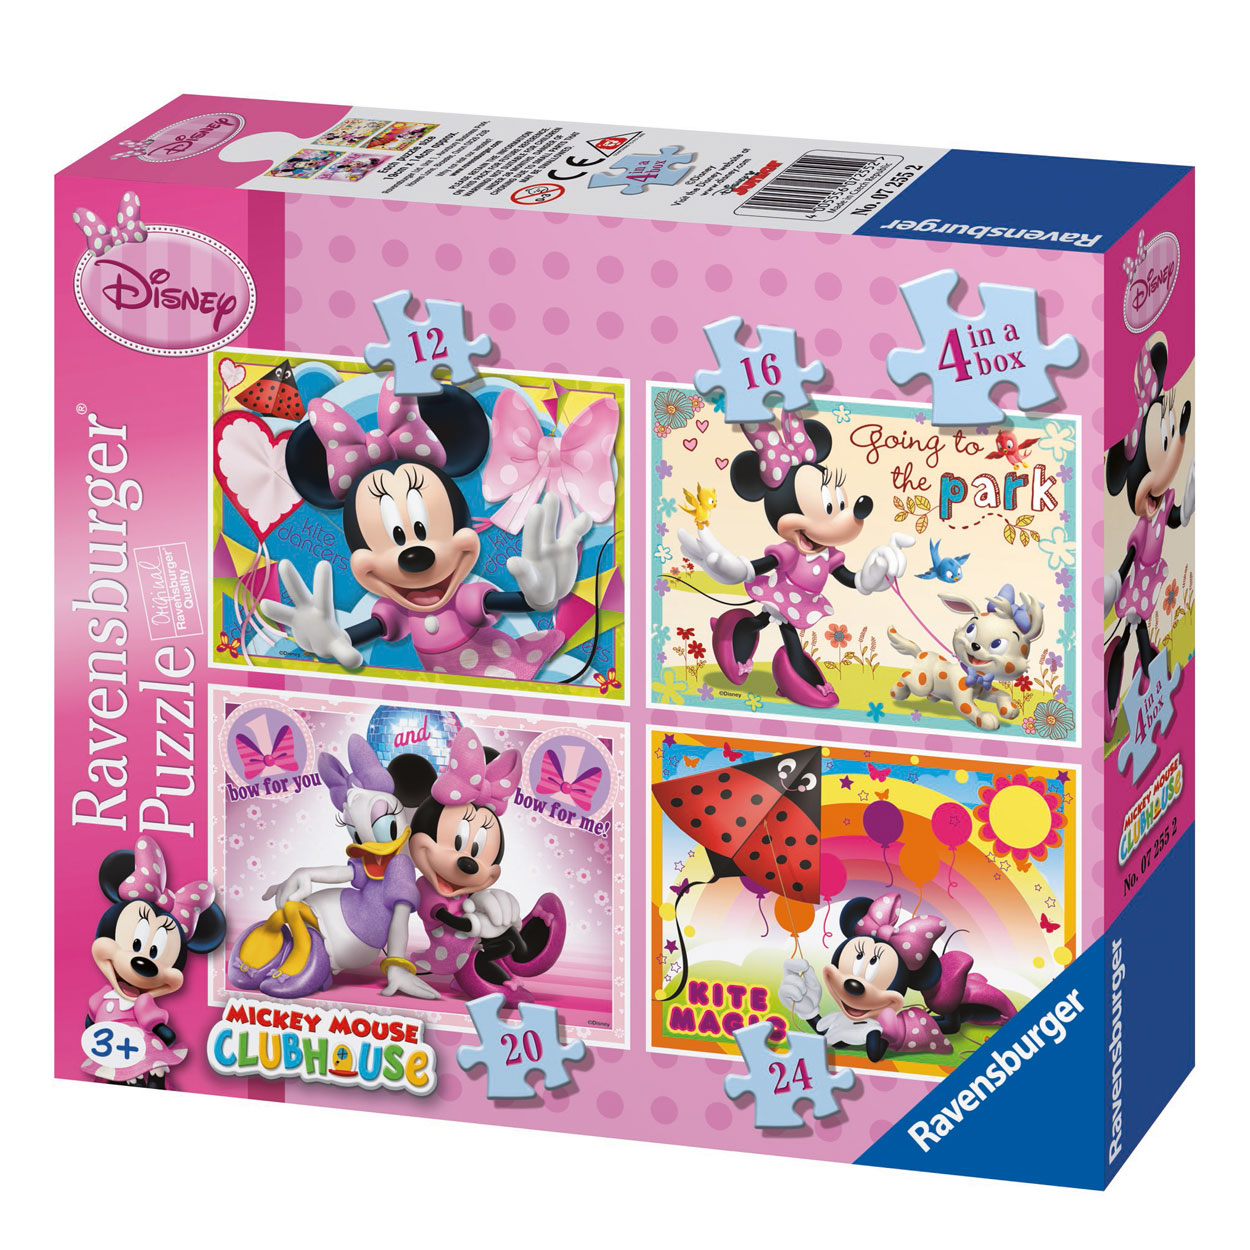 Minnie Mouse, 4in1